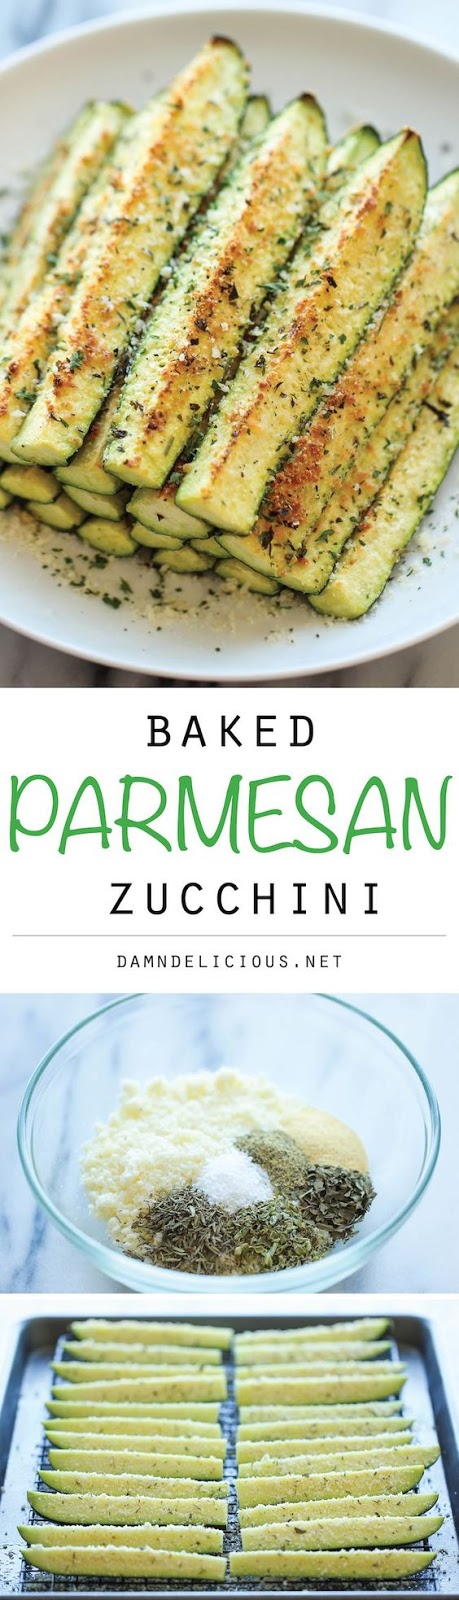 Baked Parmesan Zucchini - Crisp, tender zucchini sticks oven-roasted to perfection. It's healthy, nutritious and completely addictive!#healthyfood #esyhealthyfoods